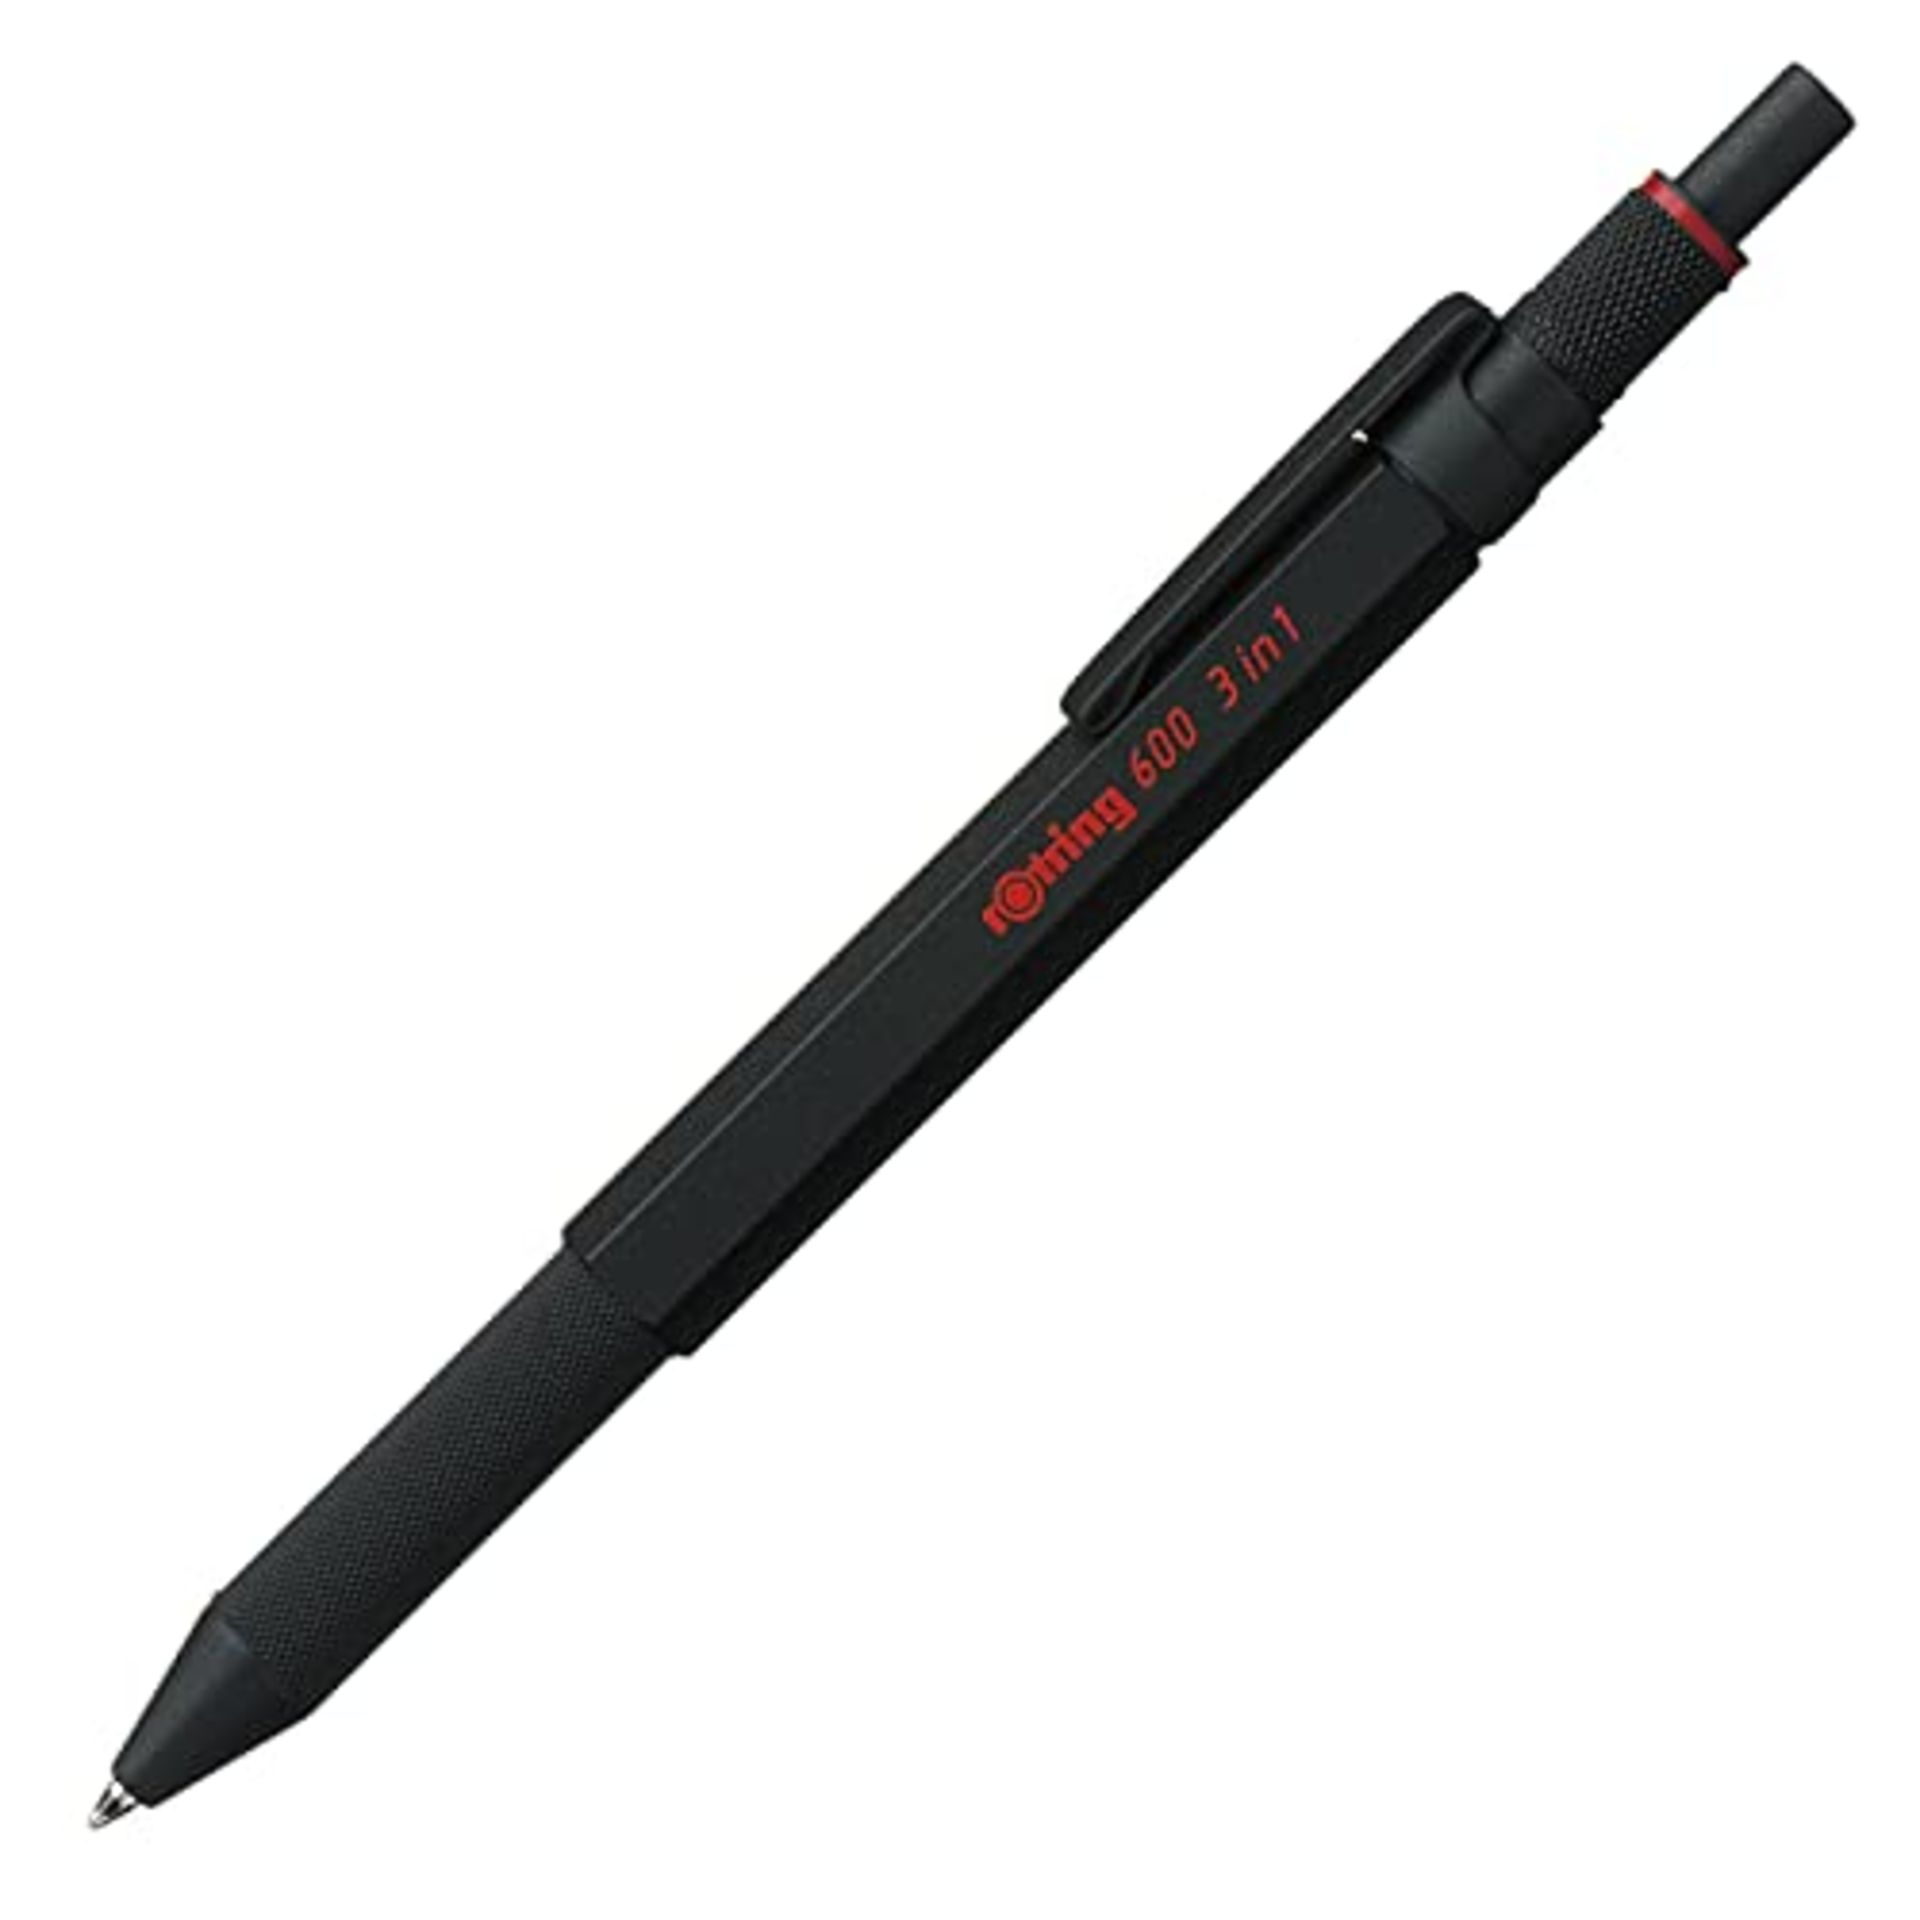 rOtring 600 Multi-colored pen and 3-in-1 mechanical pencil | 2 fine point ballpoint pe - Bild 4 aus 6